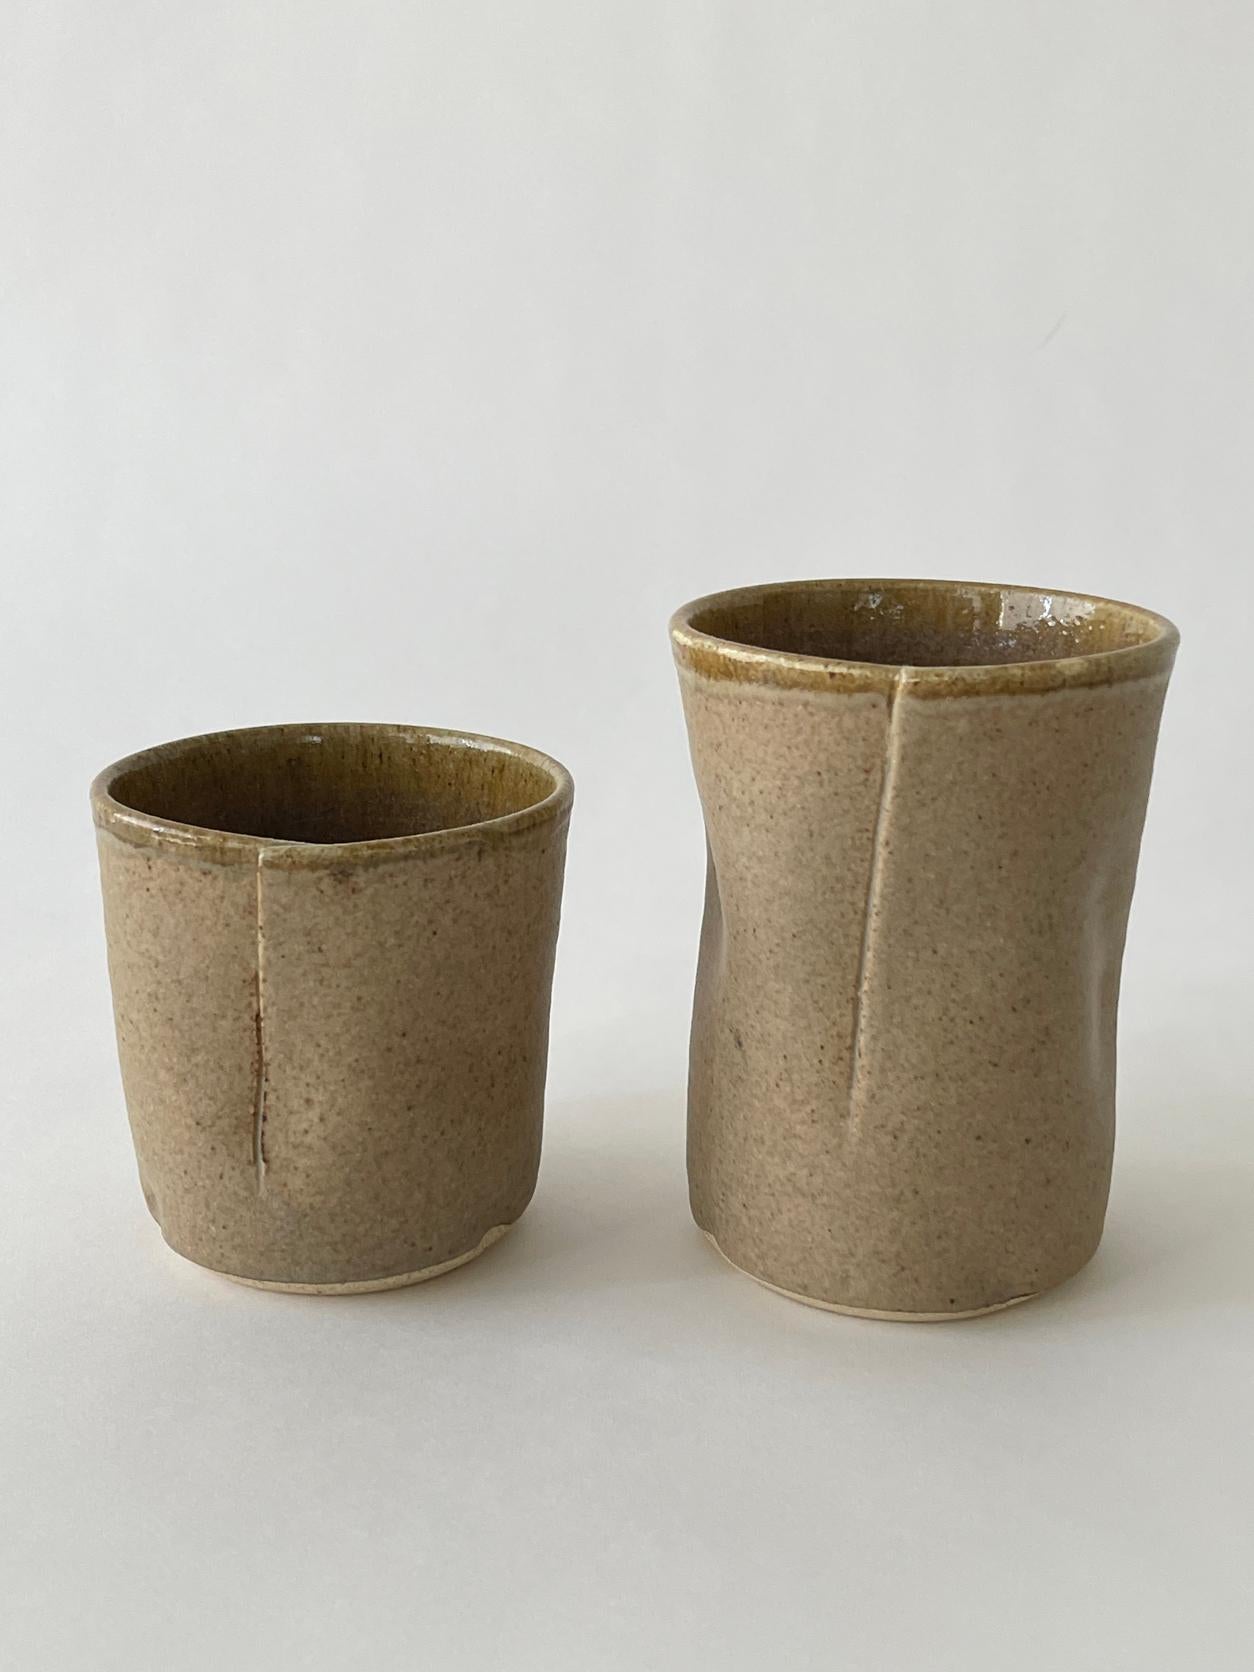 Unknown 20th Century Ceramic Handcrafted Cup Set For Sale